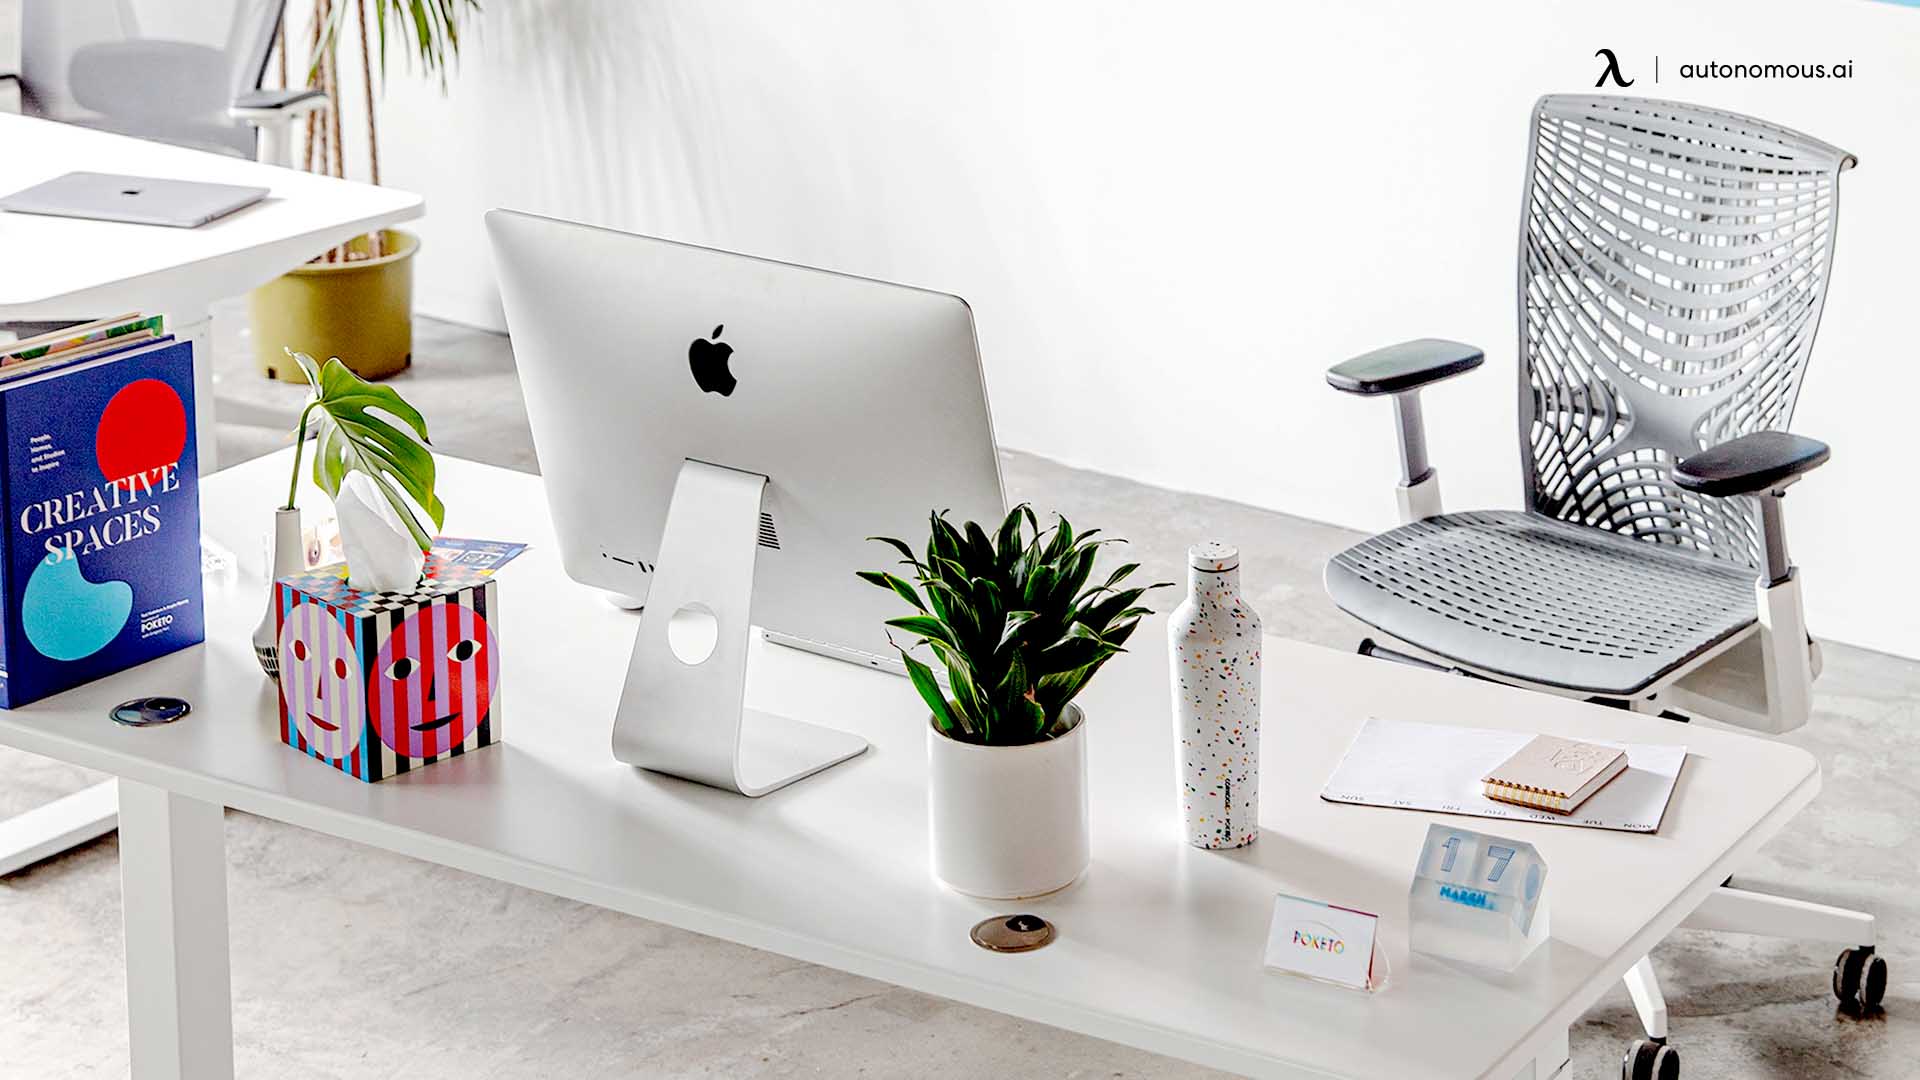 5 Must-Have Home Office Accessories for Productive Workplace